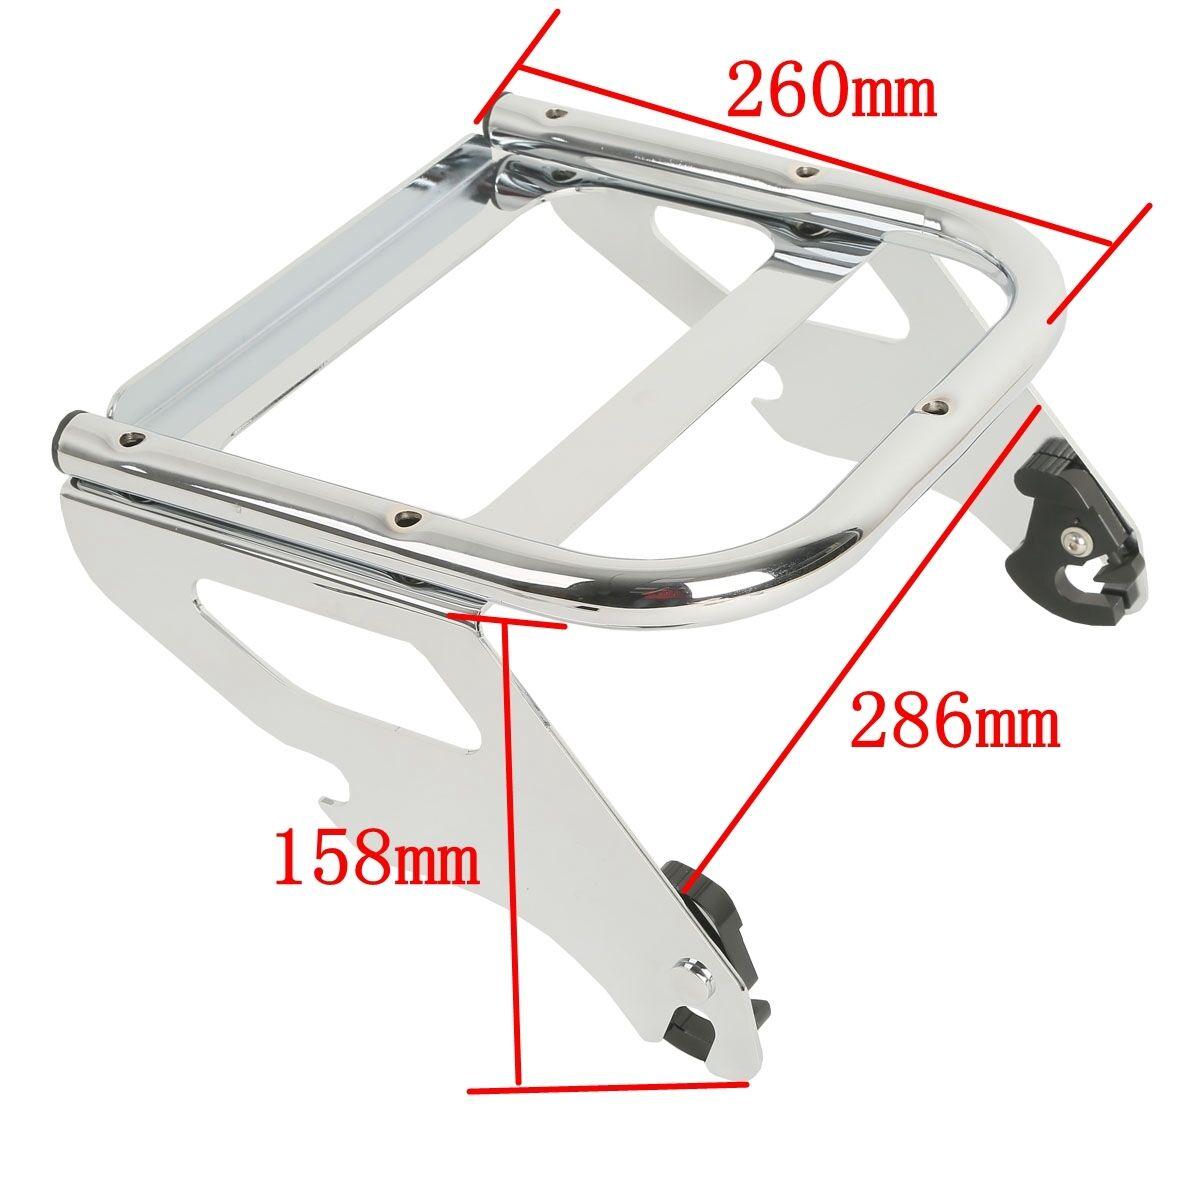 Chrome Solo Luggage Rack Mount Fit for Harley Tour Pak Touring Road Glide 97-08 - Moto Life Products